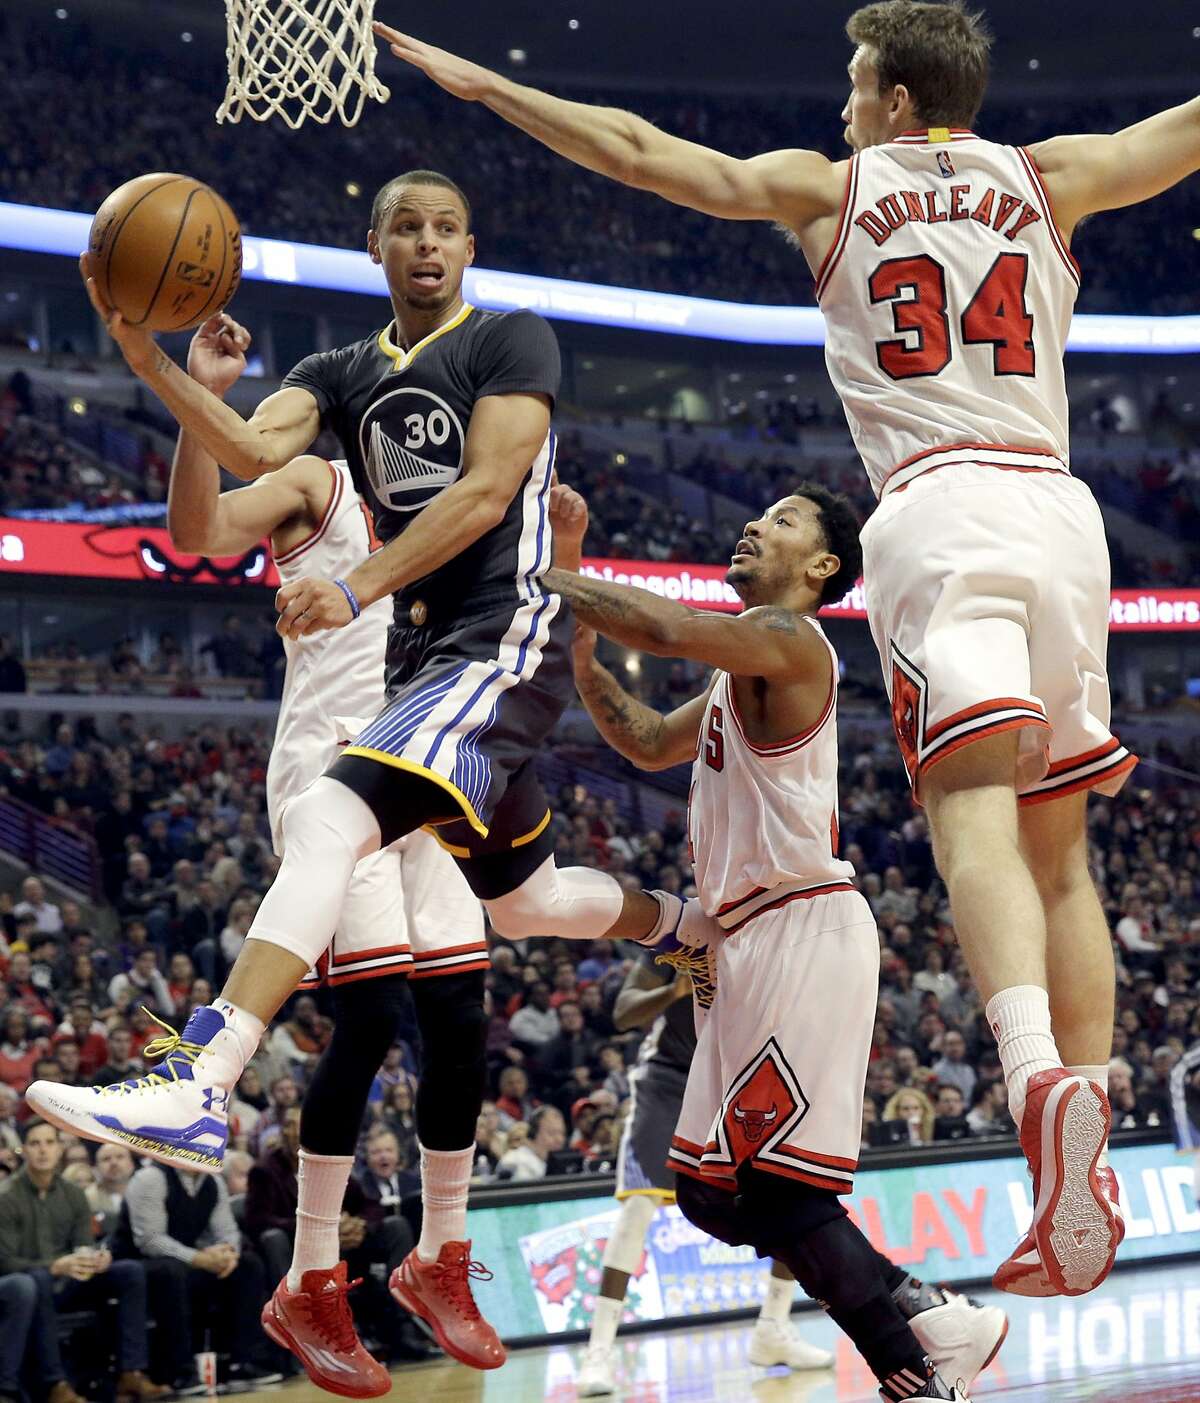 Golden State Warriors guard Stephen Curry (30) looks to pass against Chicago Bulls center/forward Joakim Noah (13), guard Derrick Rose (1) and guard/forward Mike Dunleavy (34) during the first half of an NBA basketball game in Chicago on Saturday, Dec. 6, 2014.